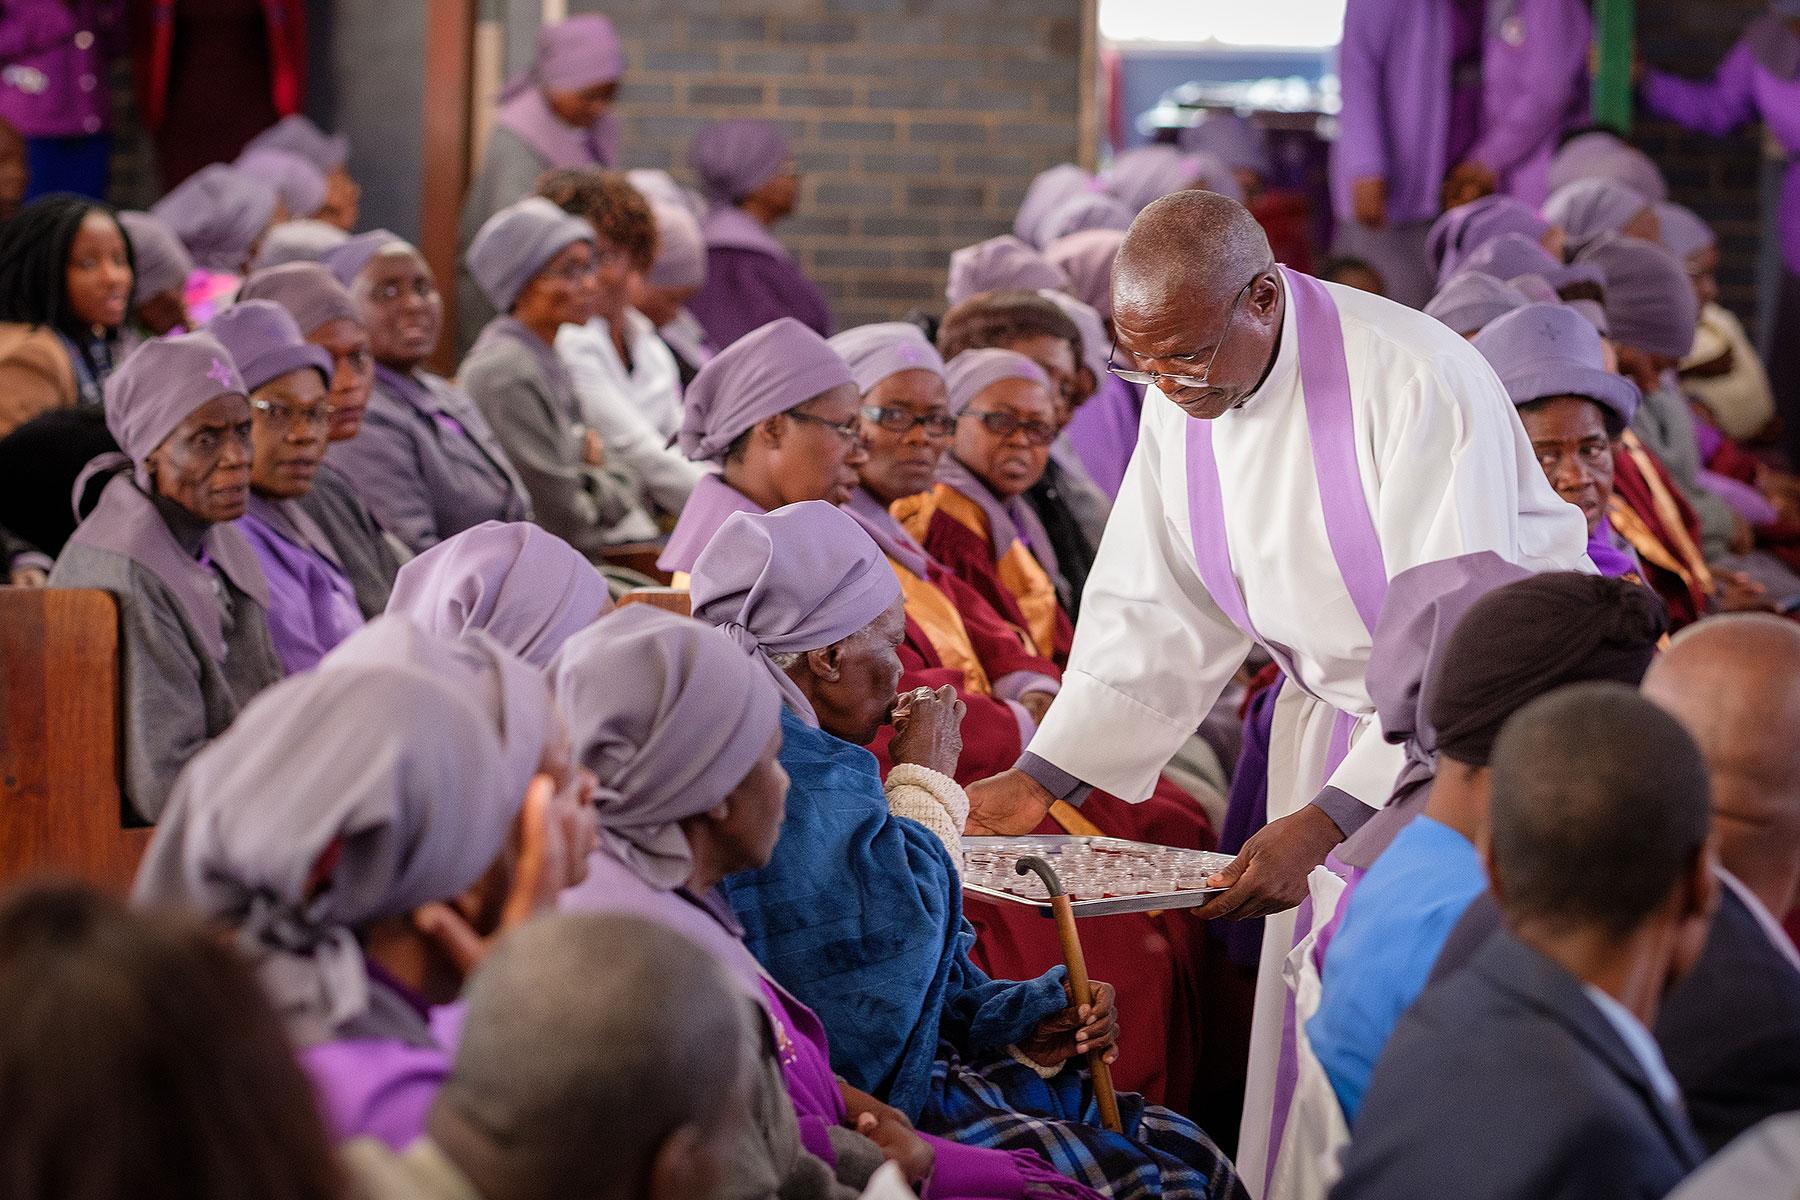 AÂ member of the Bulawayo congregation receives communion during the Sunday service.Â Photo: LWF/A. Danielsson